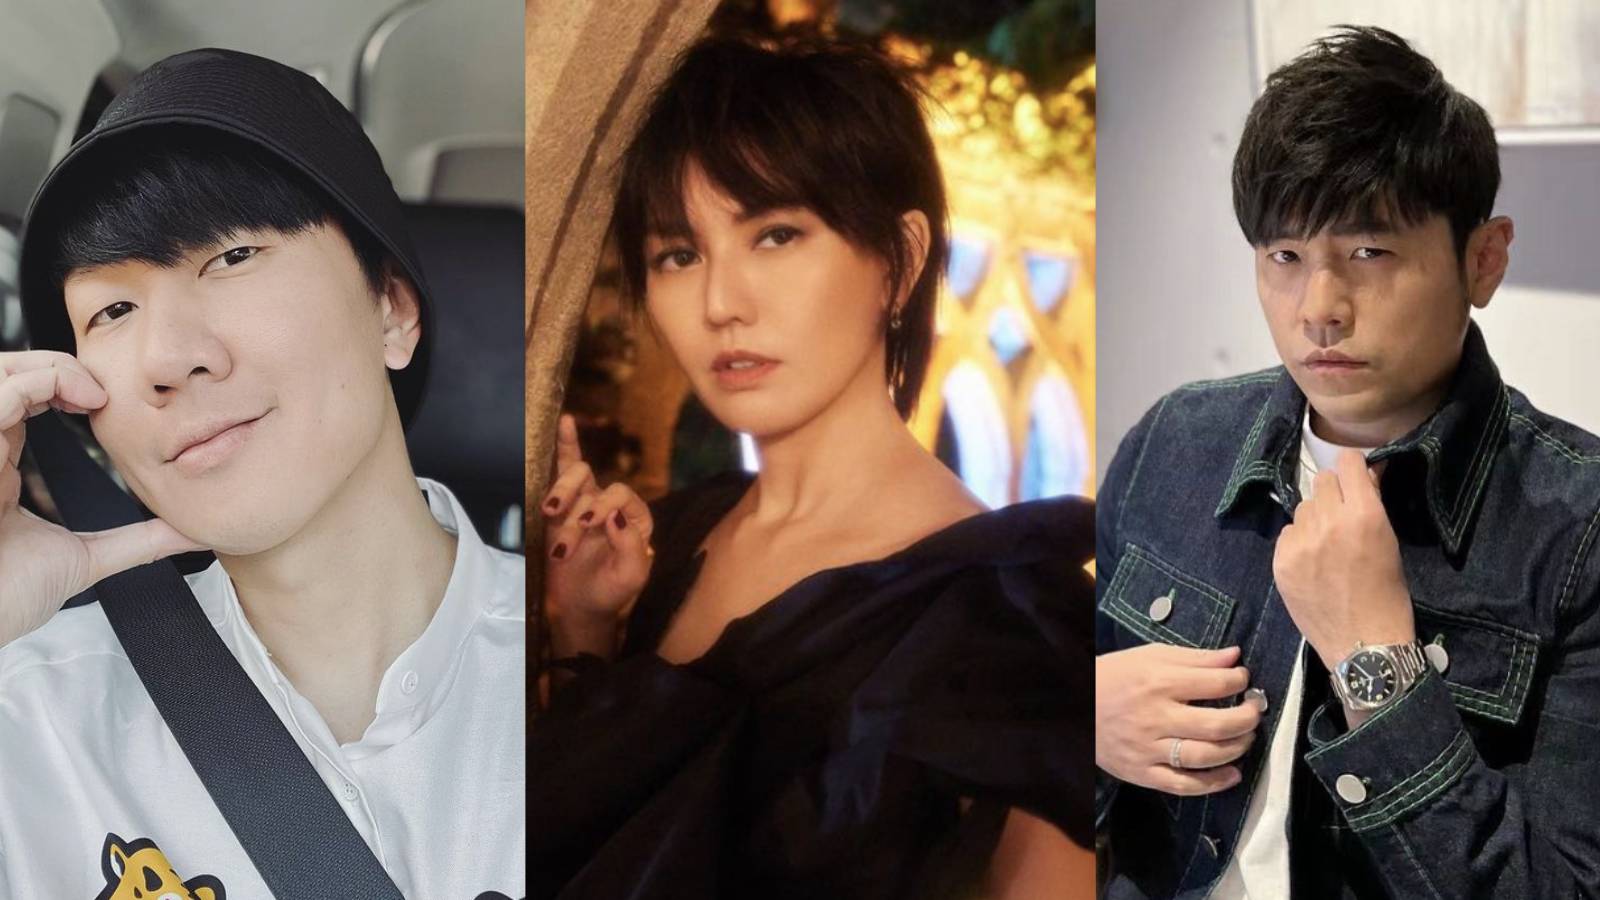 Chinese Netizen Posts List Calling Out Foreign Celebs, Including JJ Lin, Stefanie Sun And Jay Chou, Who Did Not Show Their Support For “One China”